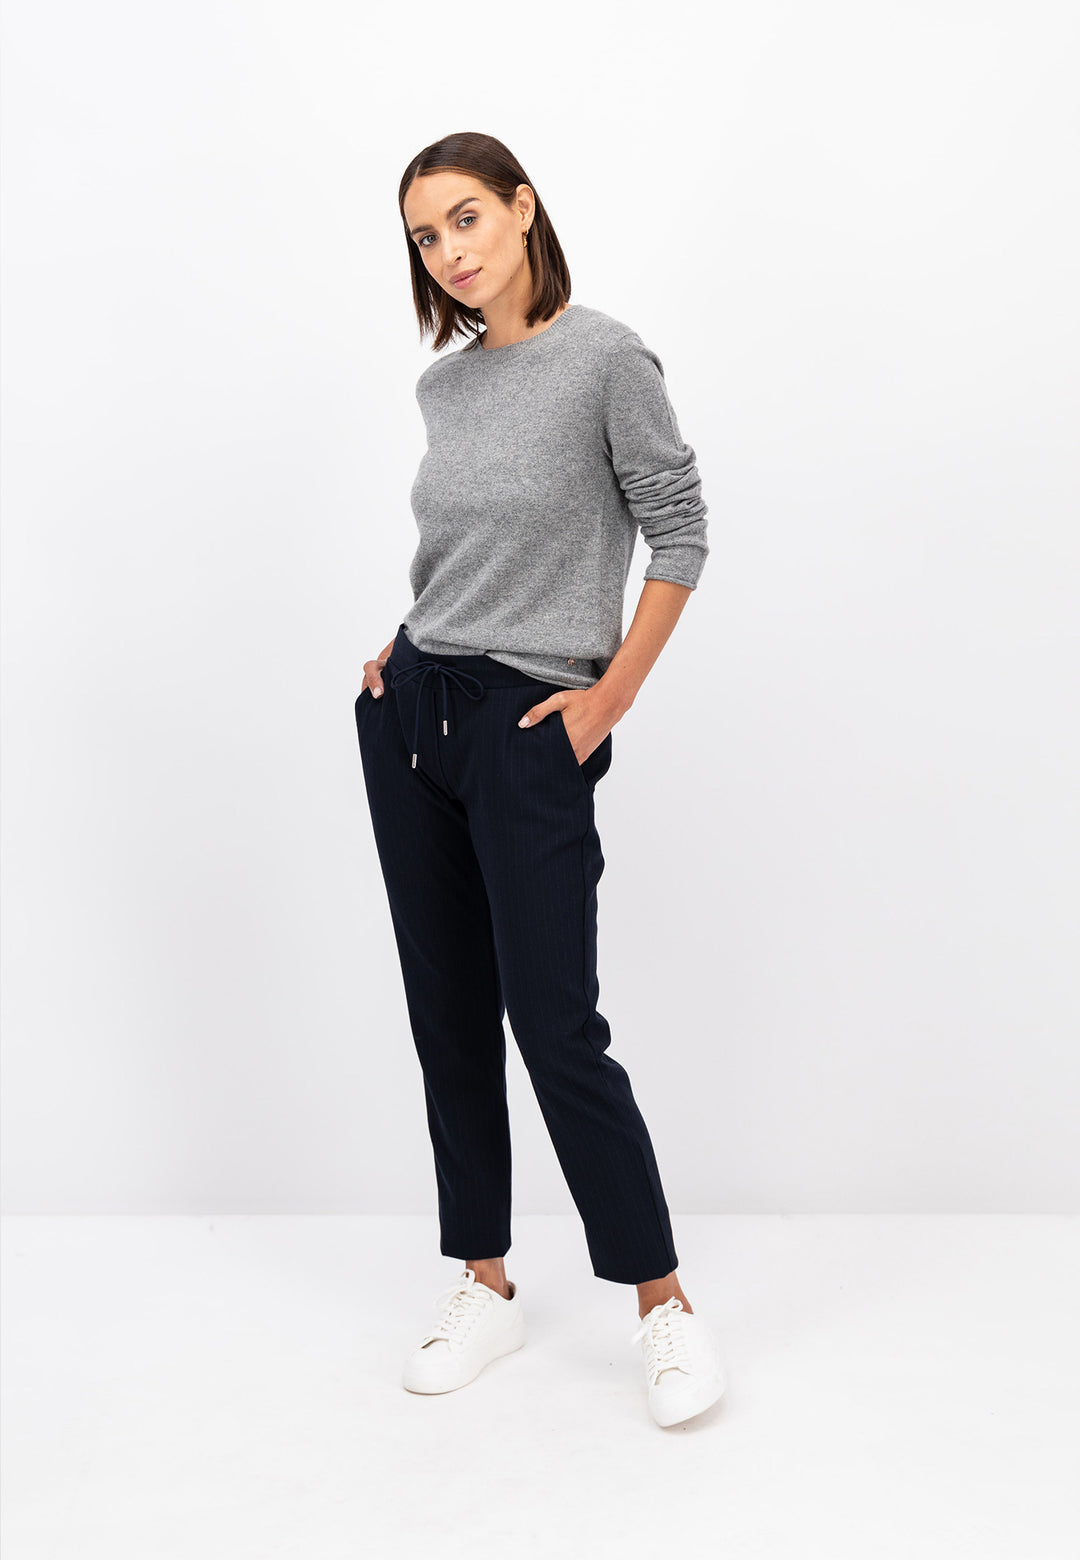 Ladies pants & skirts | Fynch-Hatton Official Online Shop – FYNCH-HATTON |  Offizieller Online Shop